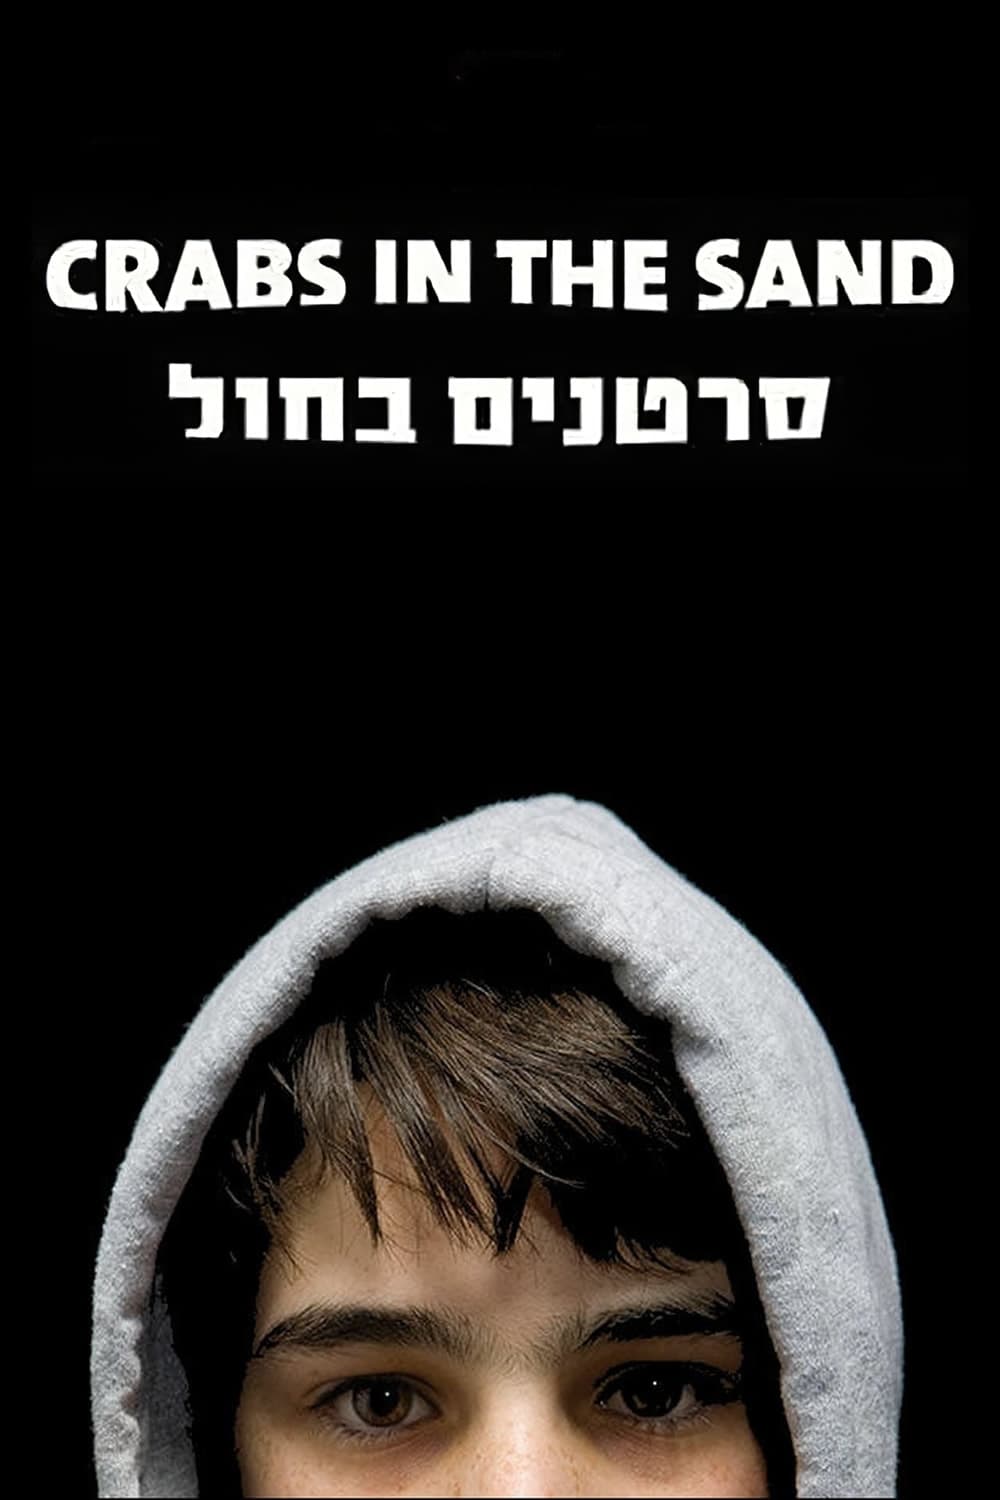 Crabs in the Sand